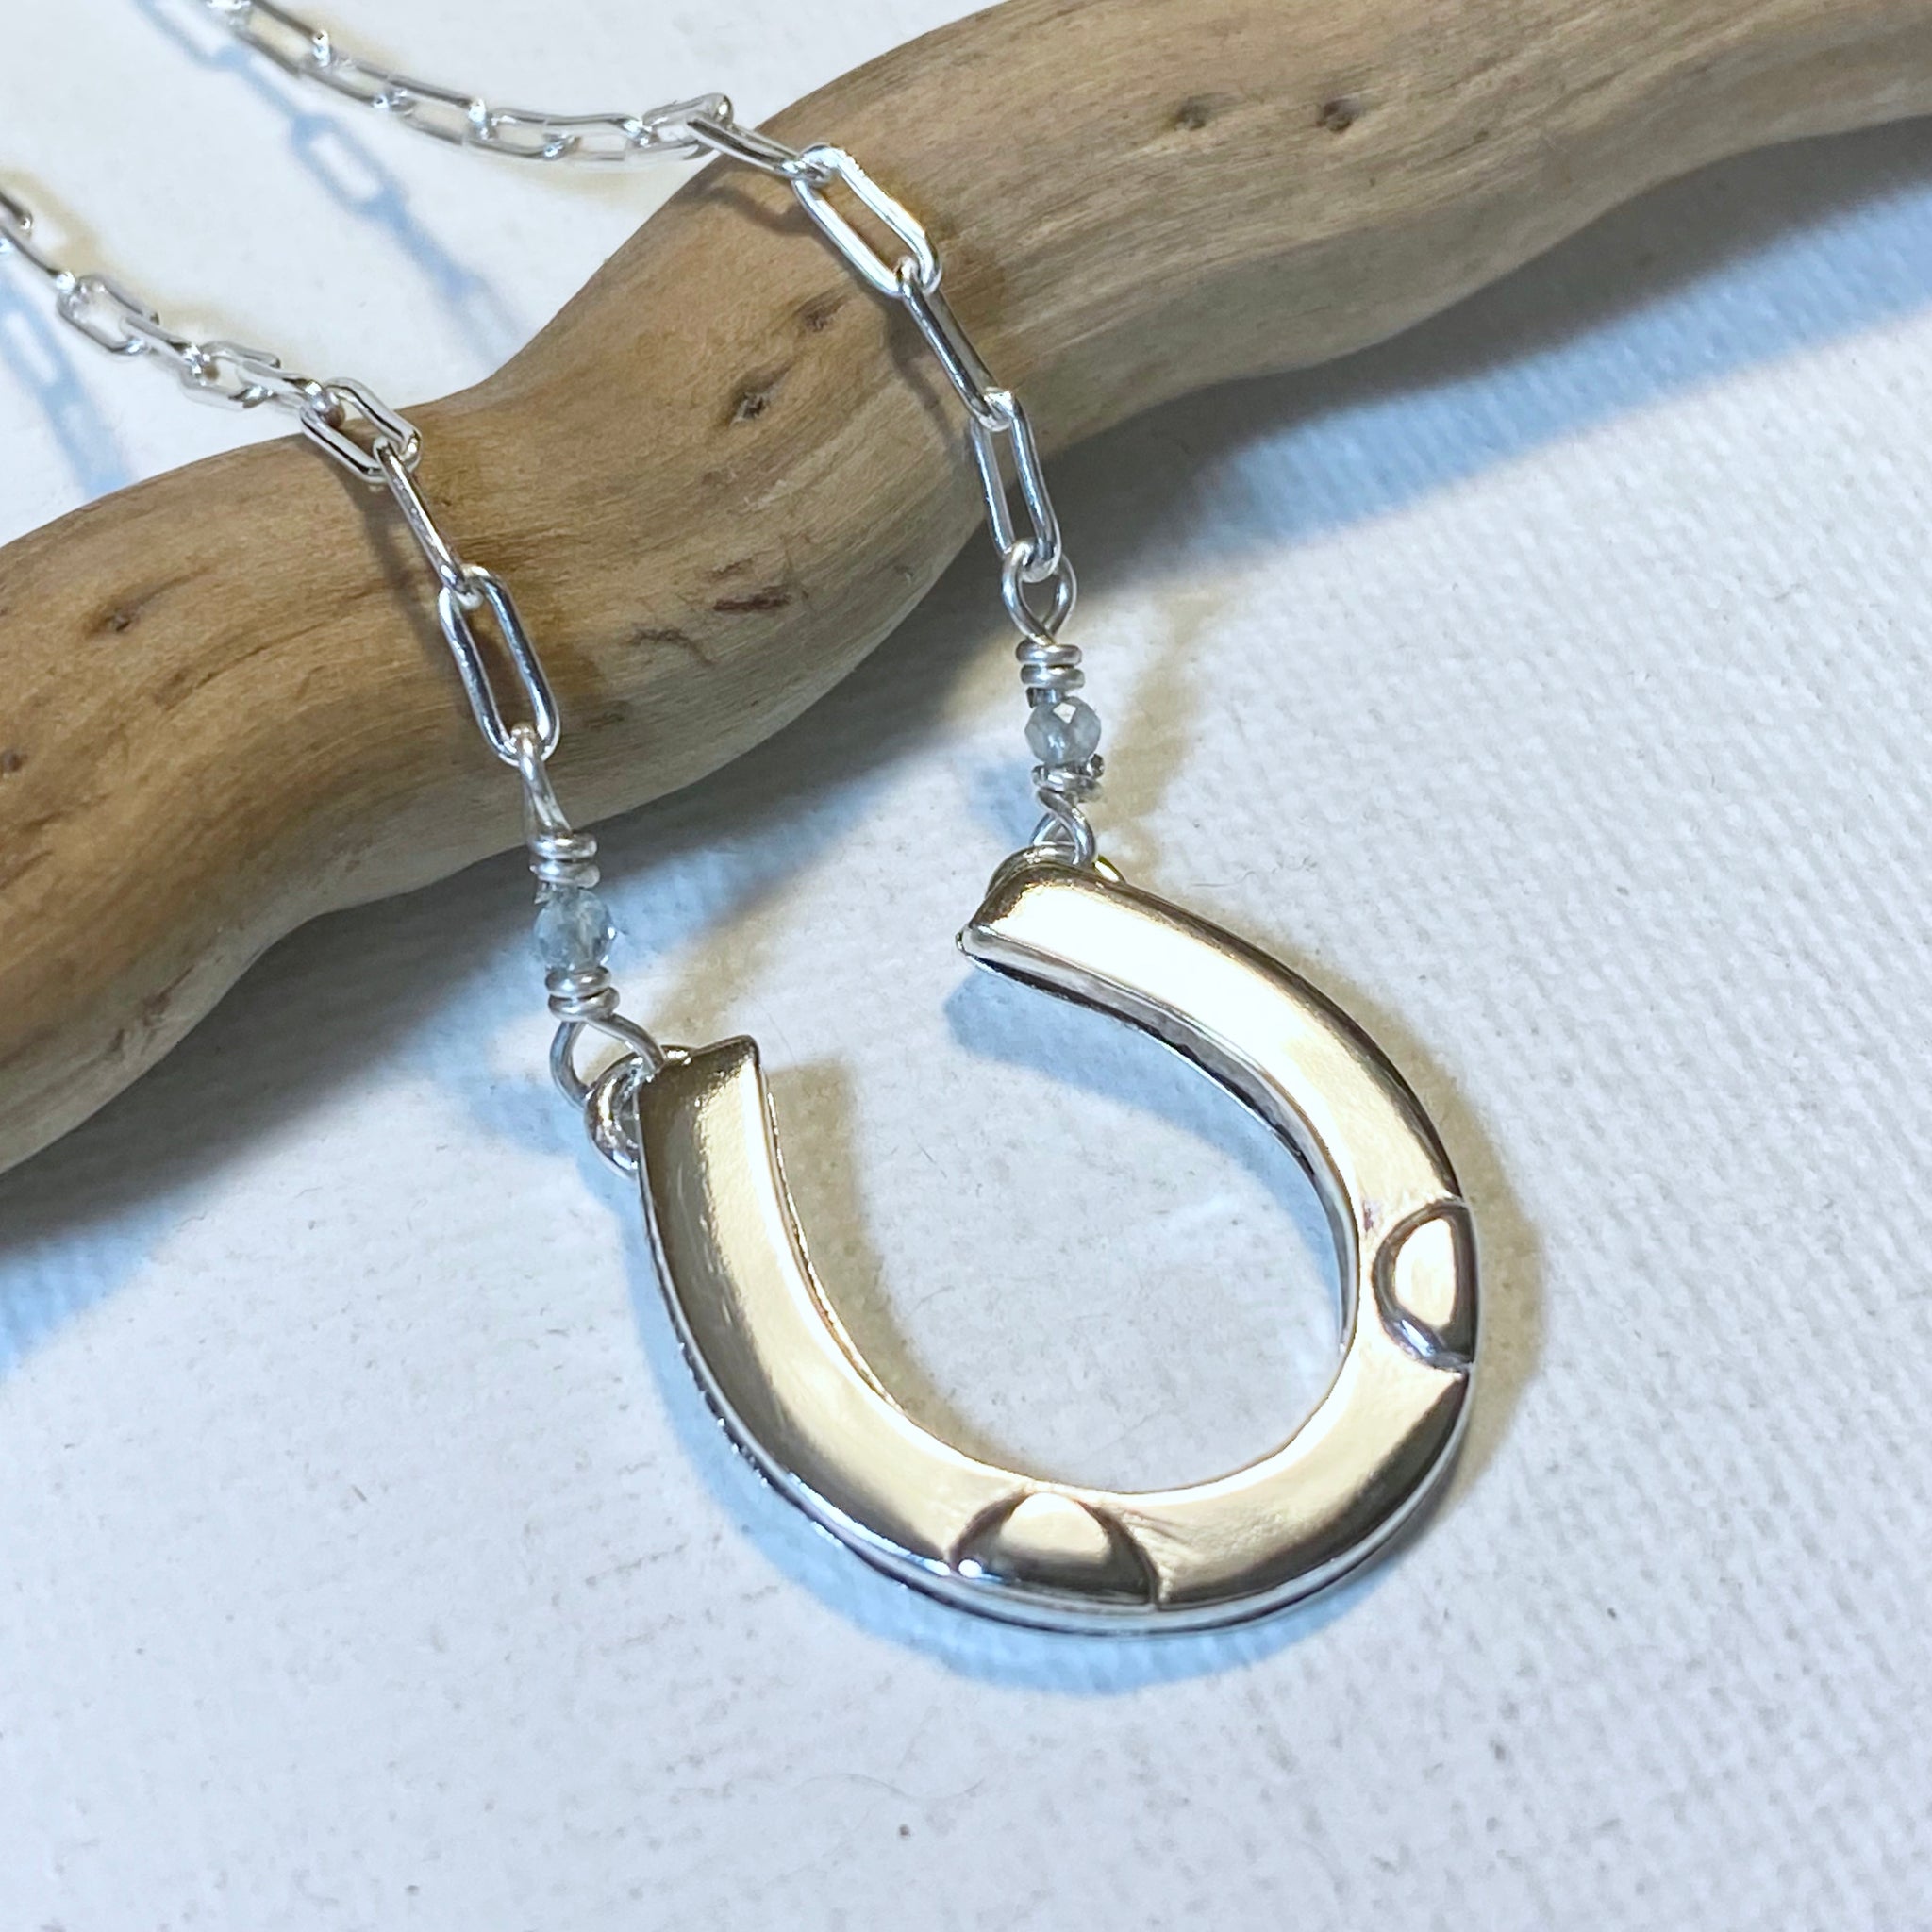 Canadian handcrafted sterling silver jewellery